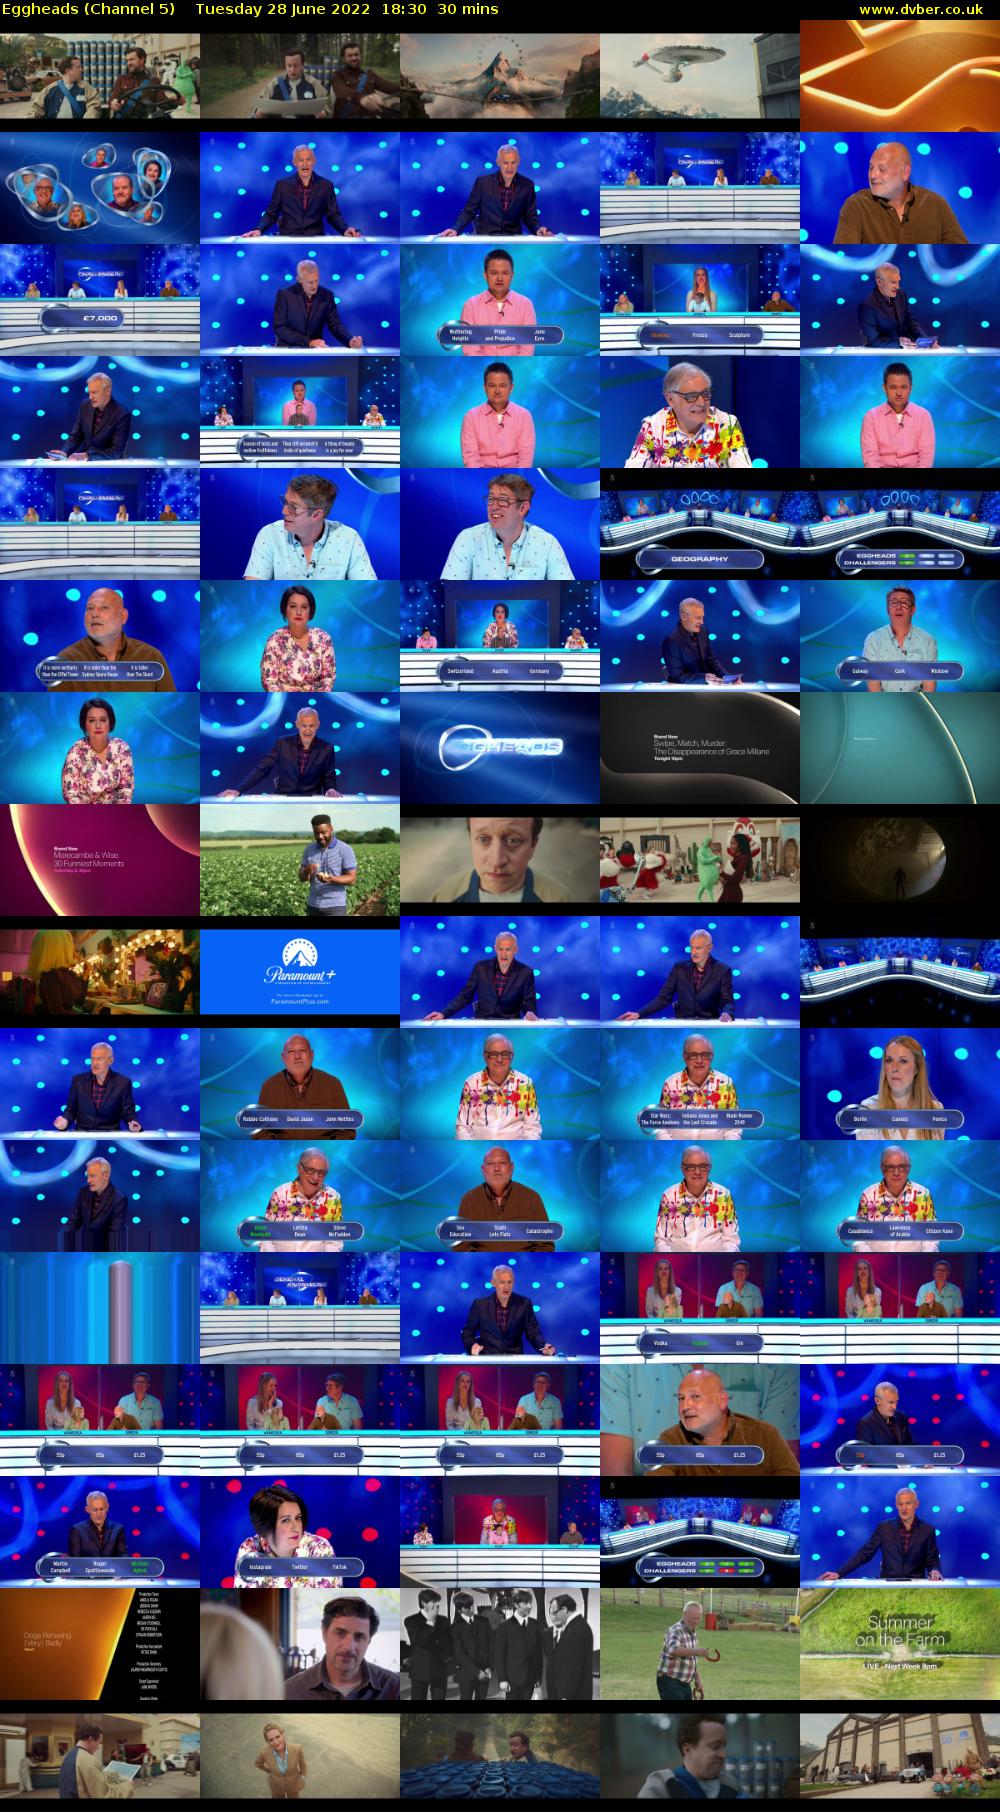 Eggheads (Channel 5) Tuesday 28 June 2022 18:30 - 19:00